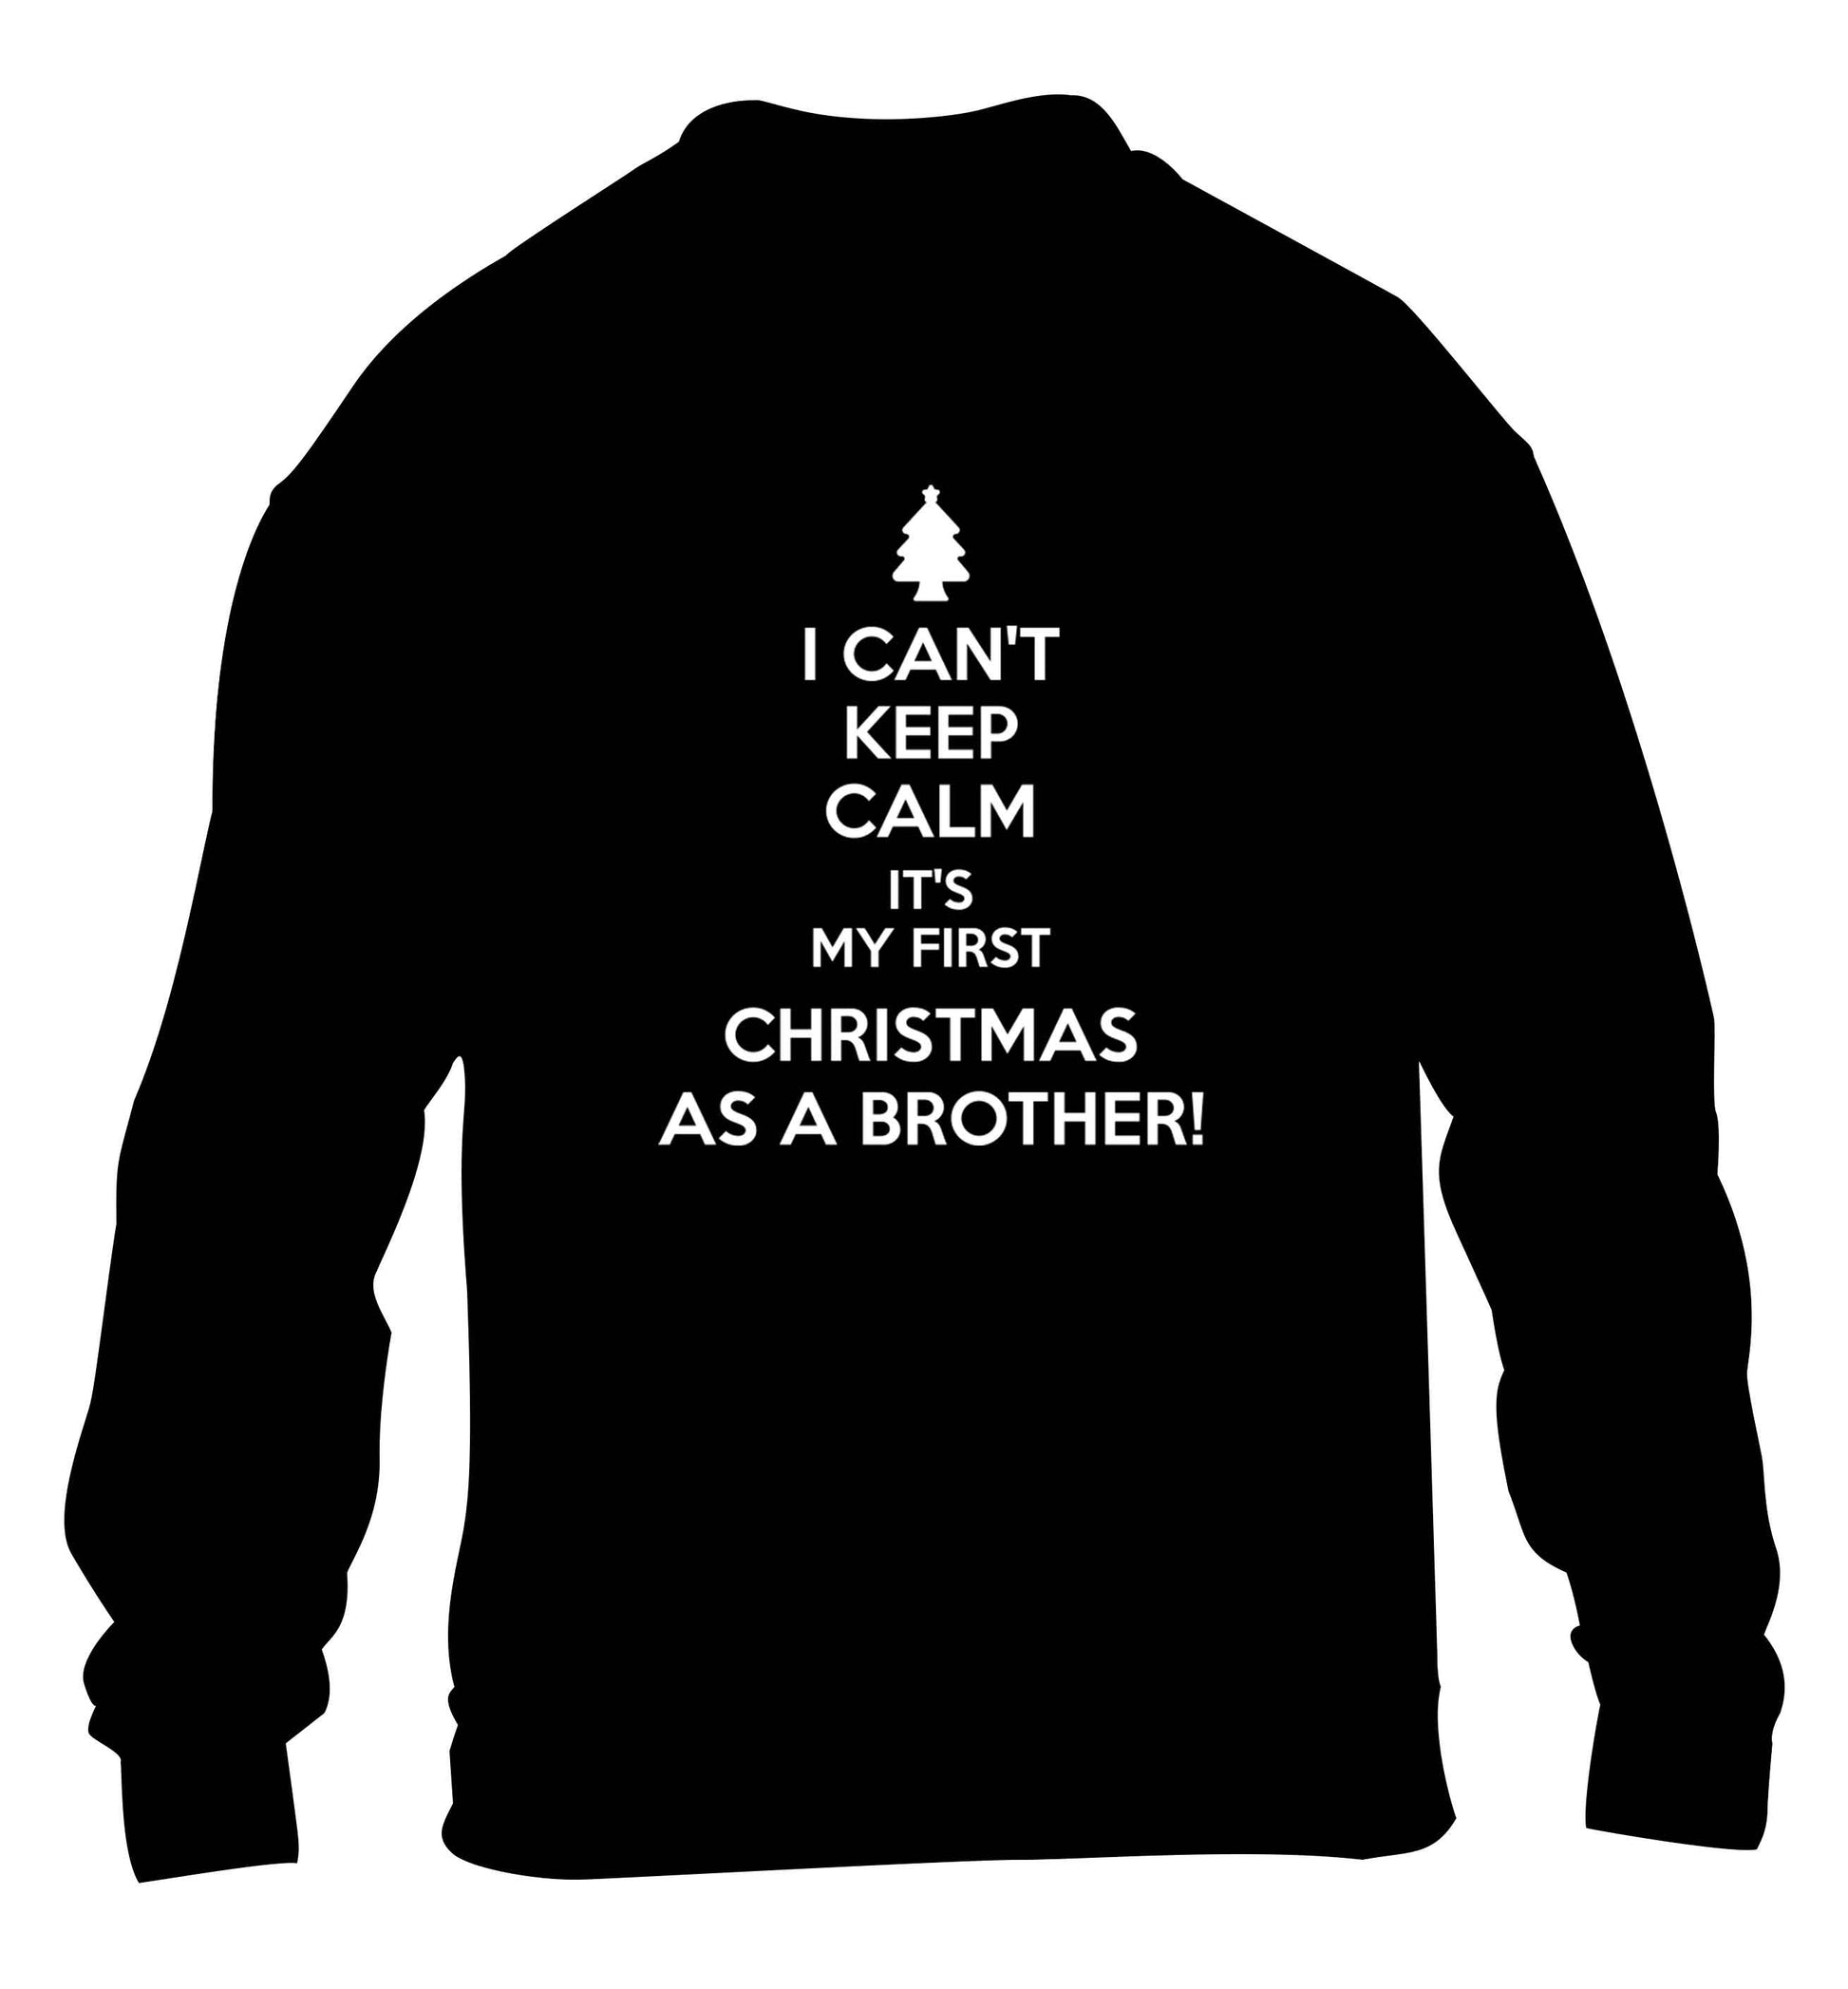 I can't keep calm it's my first Christmas as a brother! children's black sweater 12-13 Years